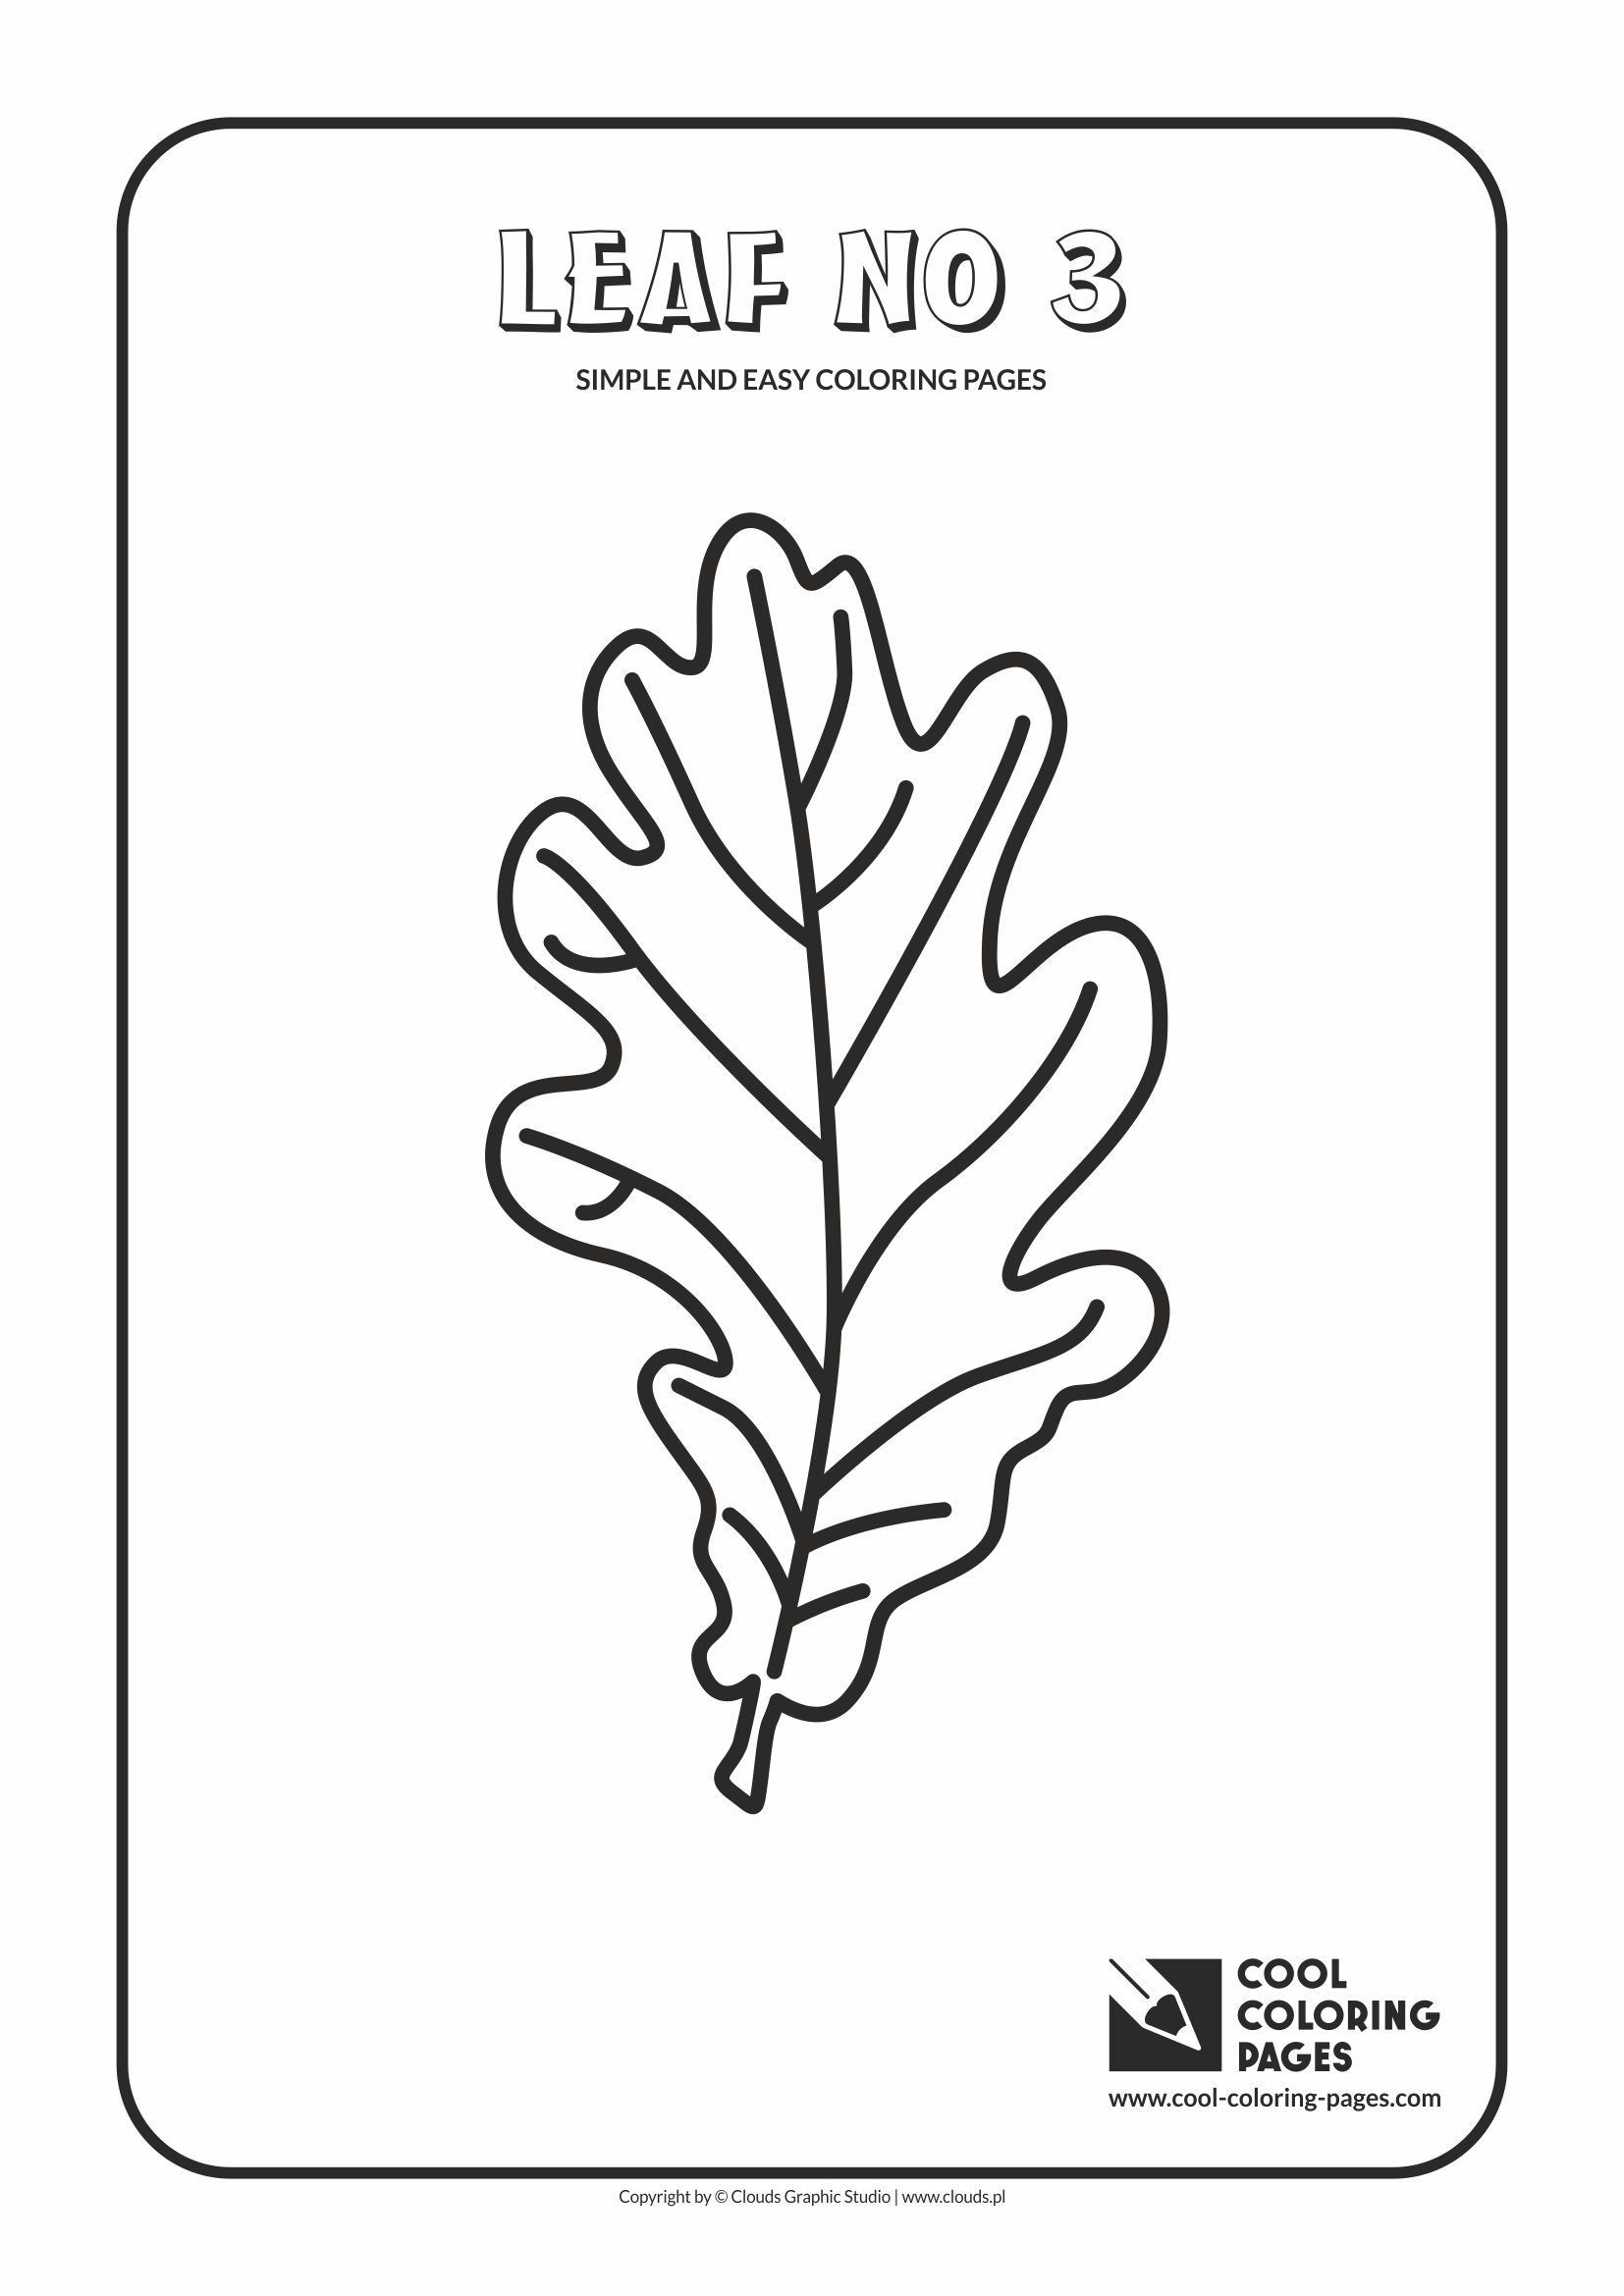 Simple and easy coloring pages for toddlers - Leaf no 3